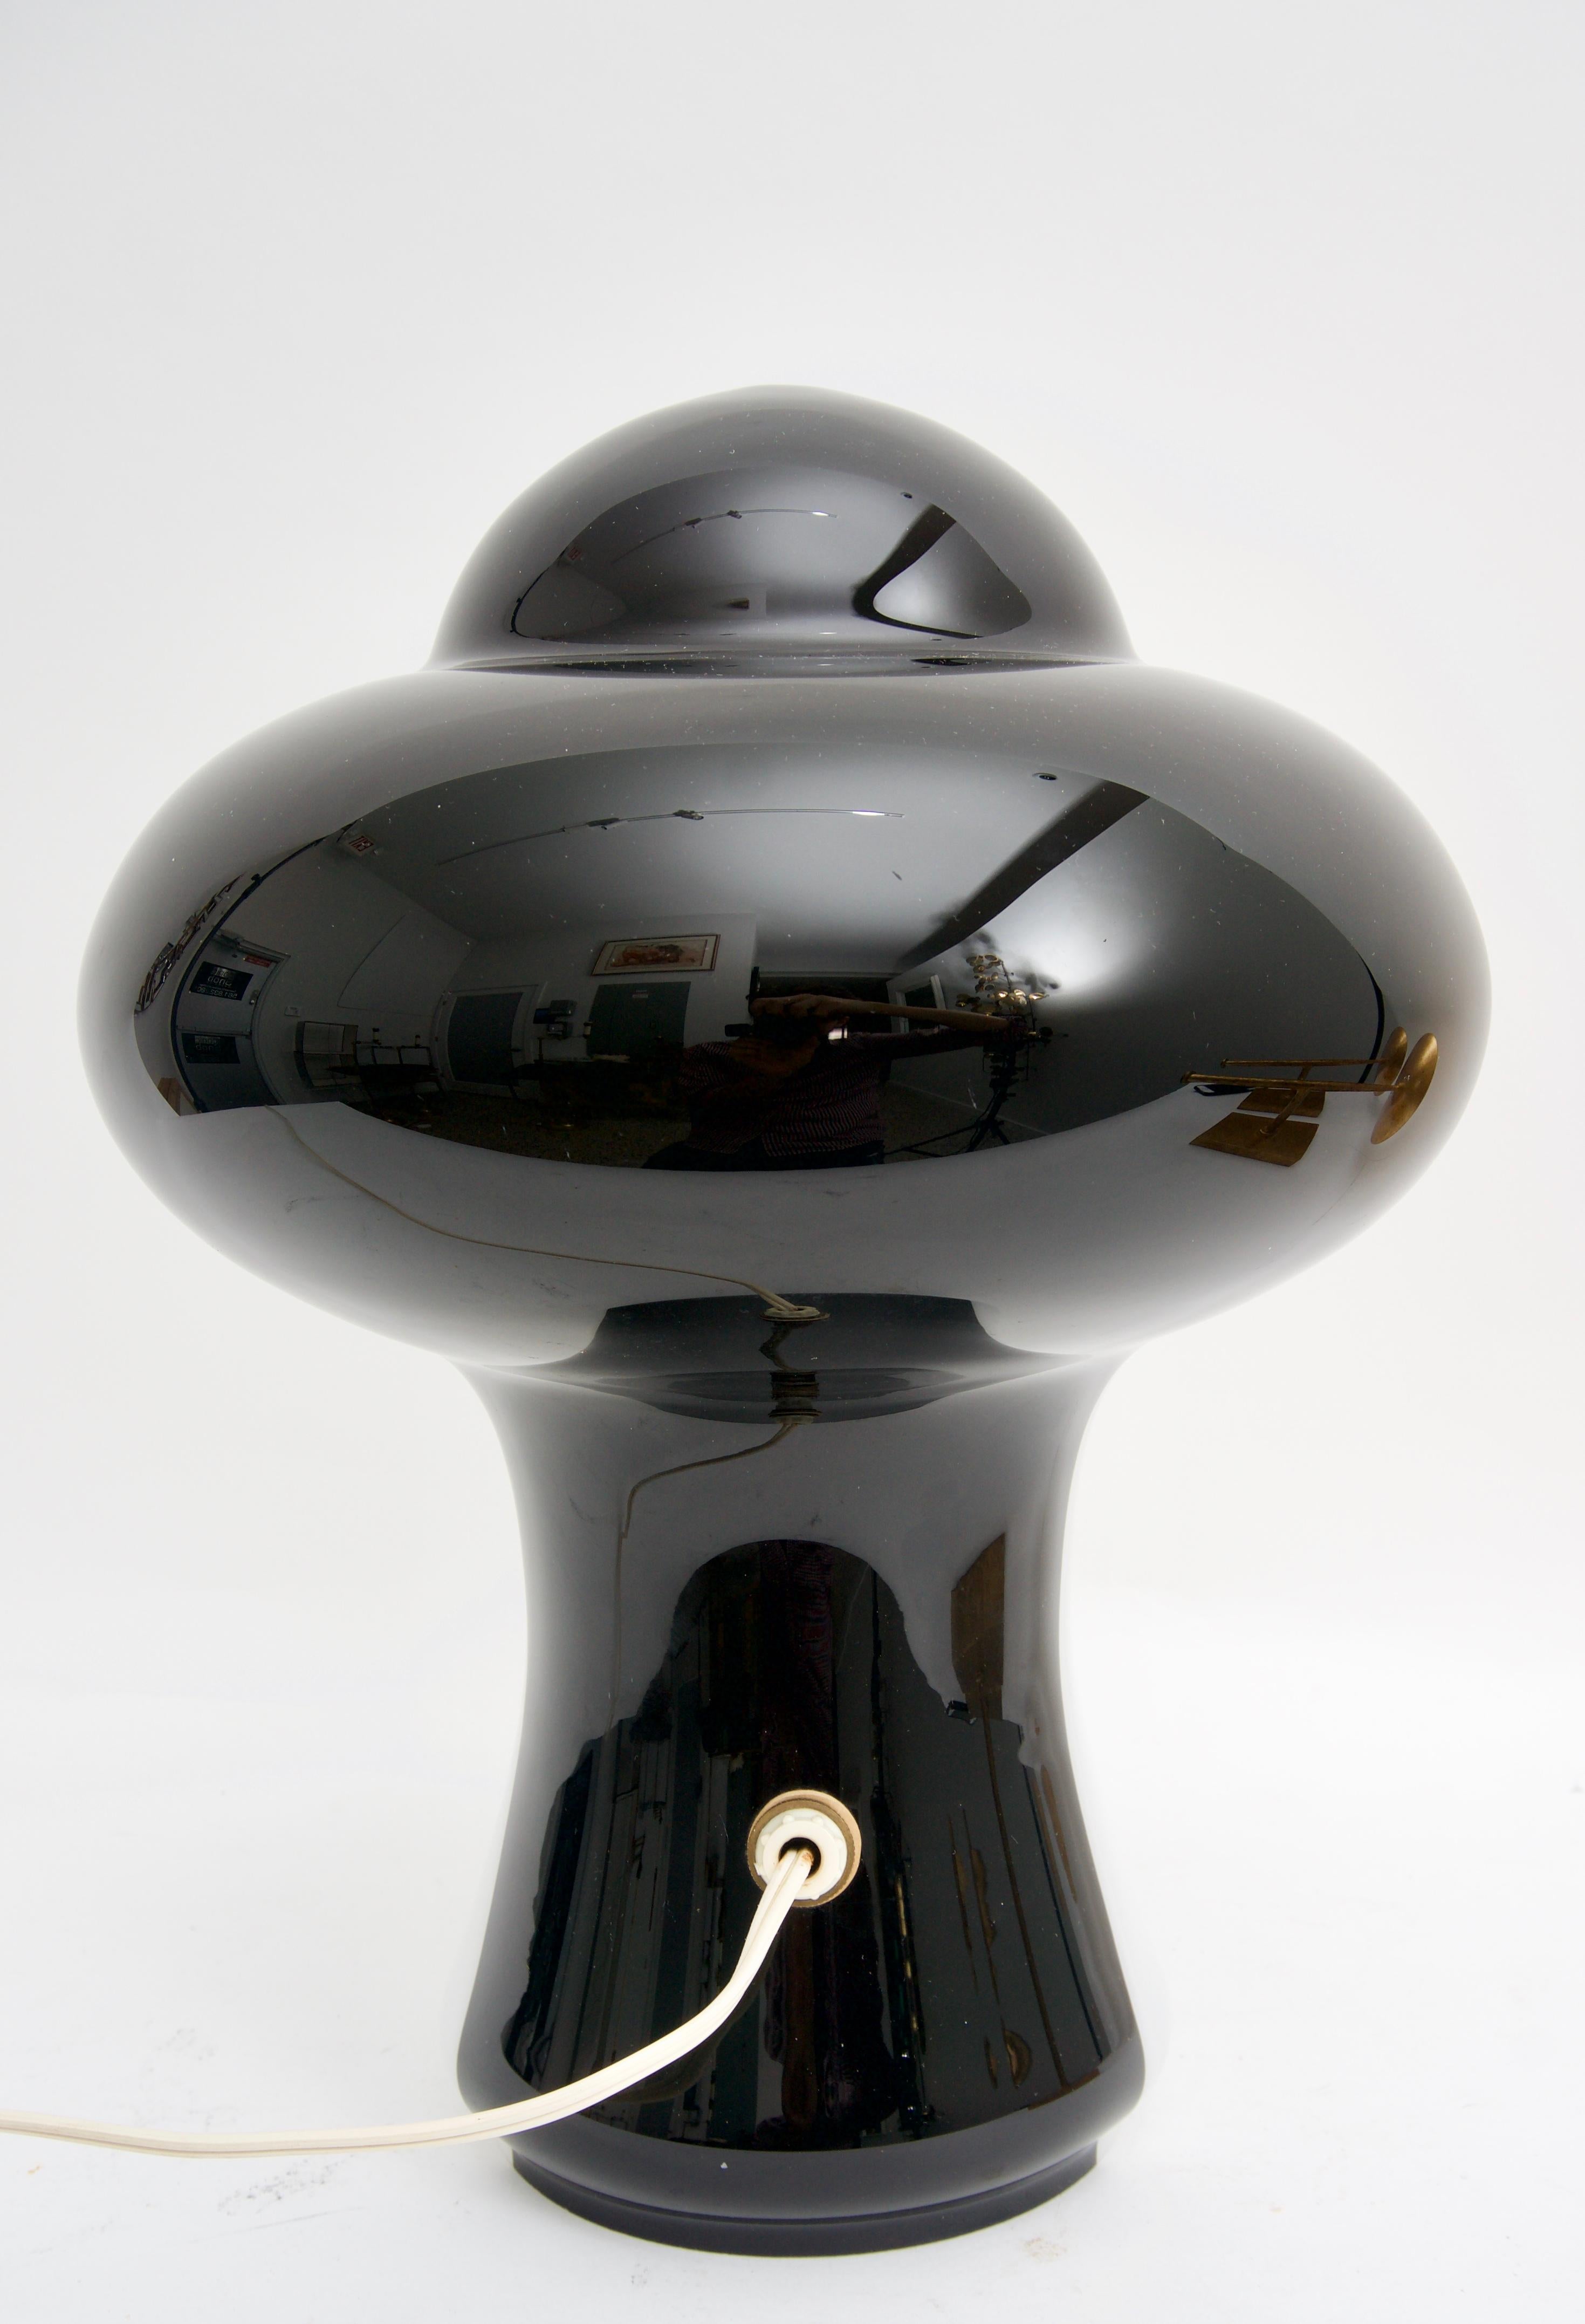 This stylish Murano glass lamp was acquired from an estate in London, England and dates to the 1960s-1970s. With its mod black and white coloration it definitely makes a statement.

Note: The plug is wired for US sockets.